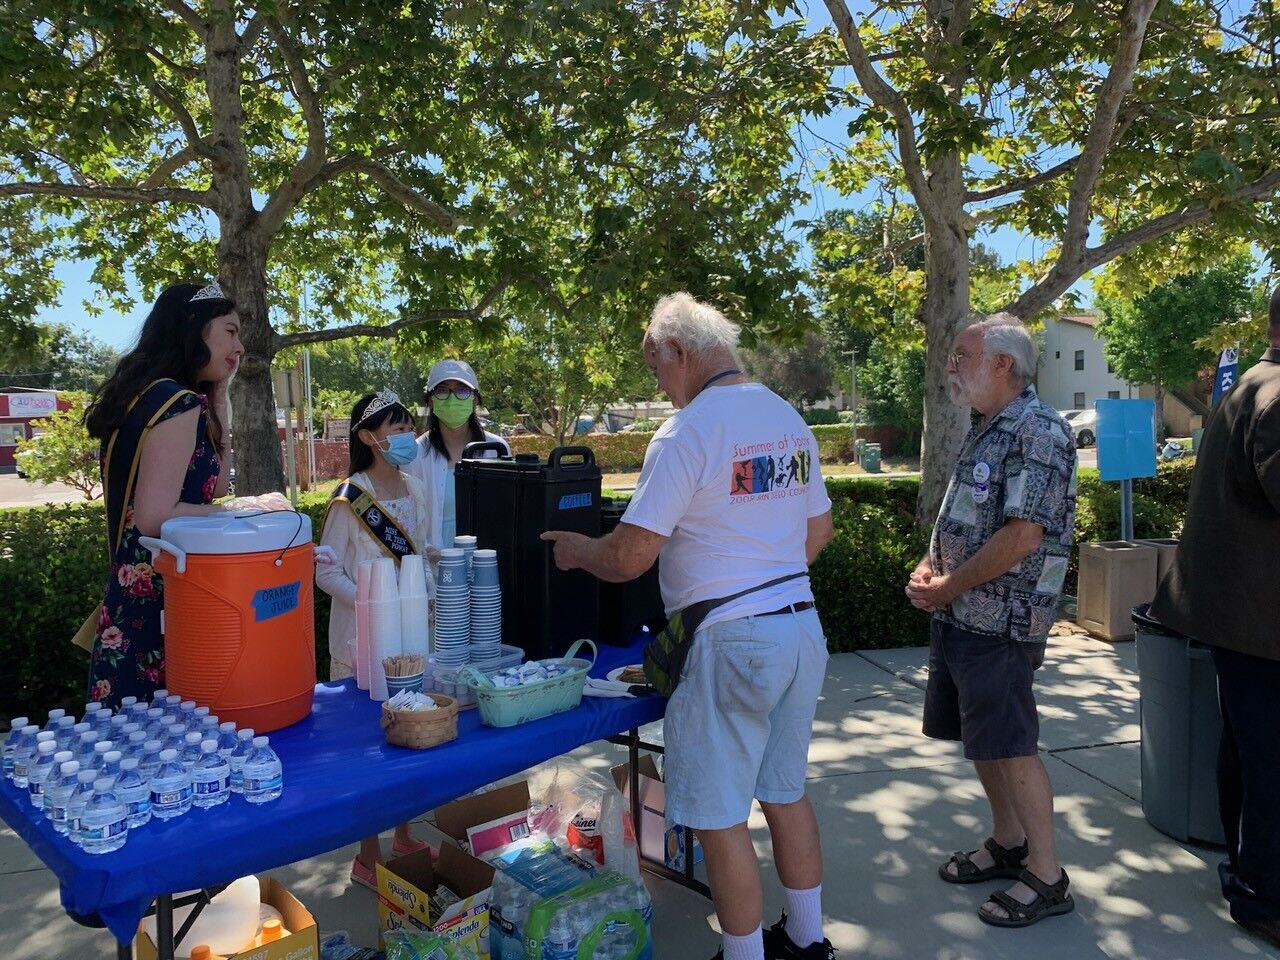 Poway Kiwanis princesses serve coffee at the library on June 18.